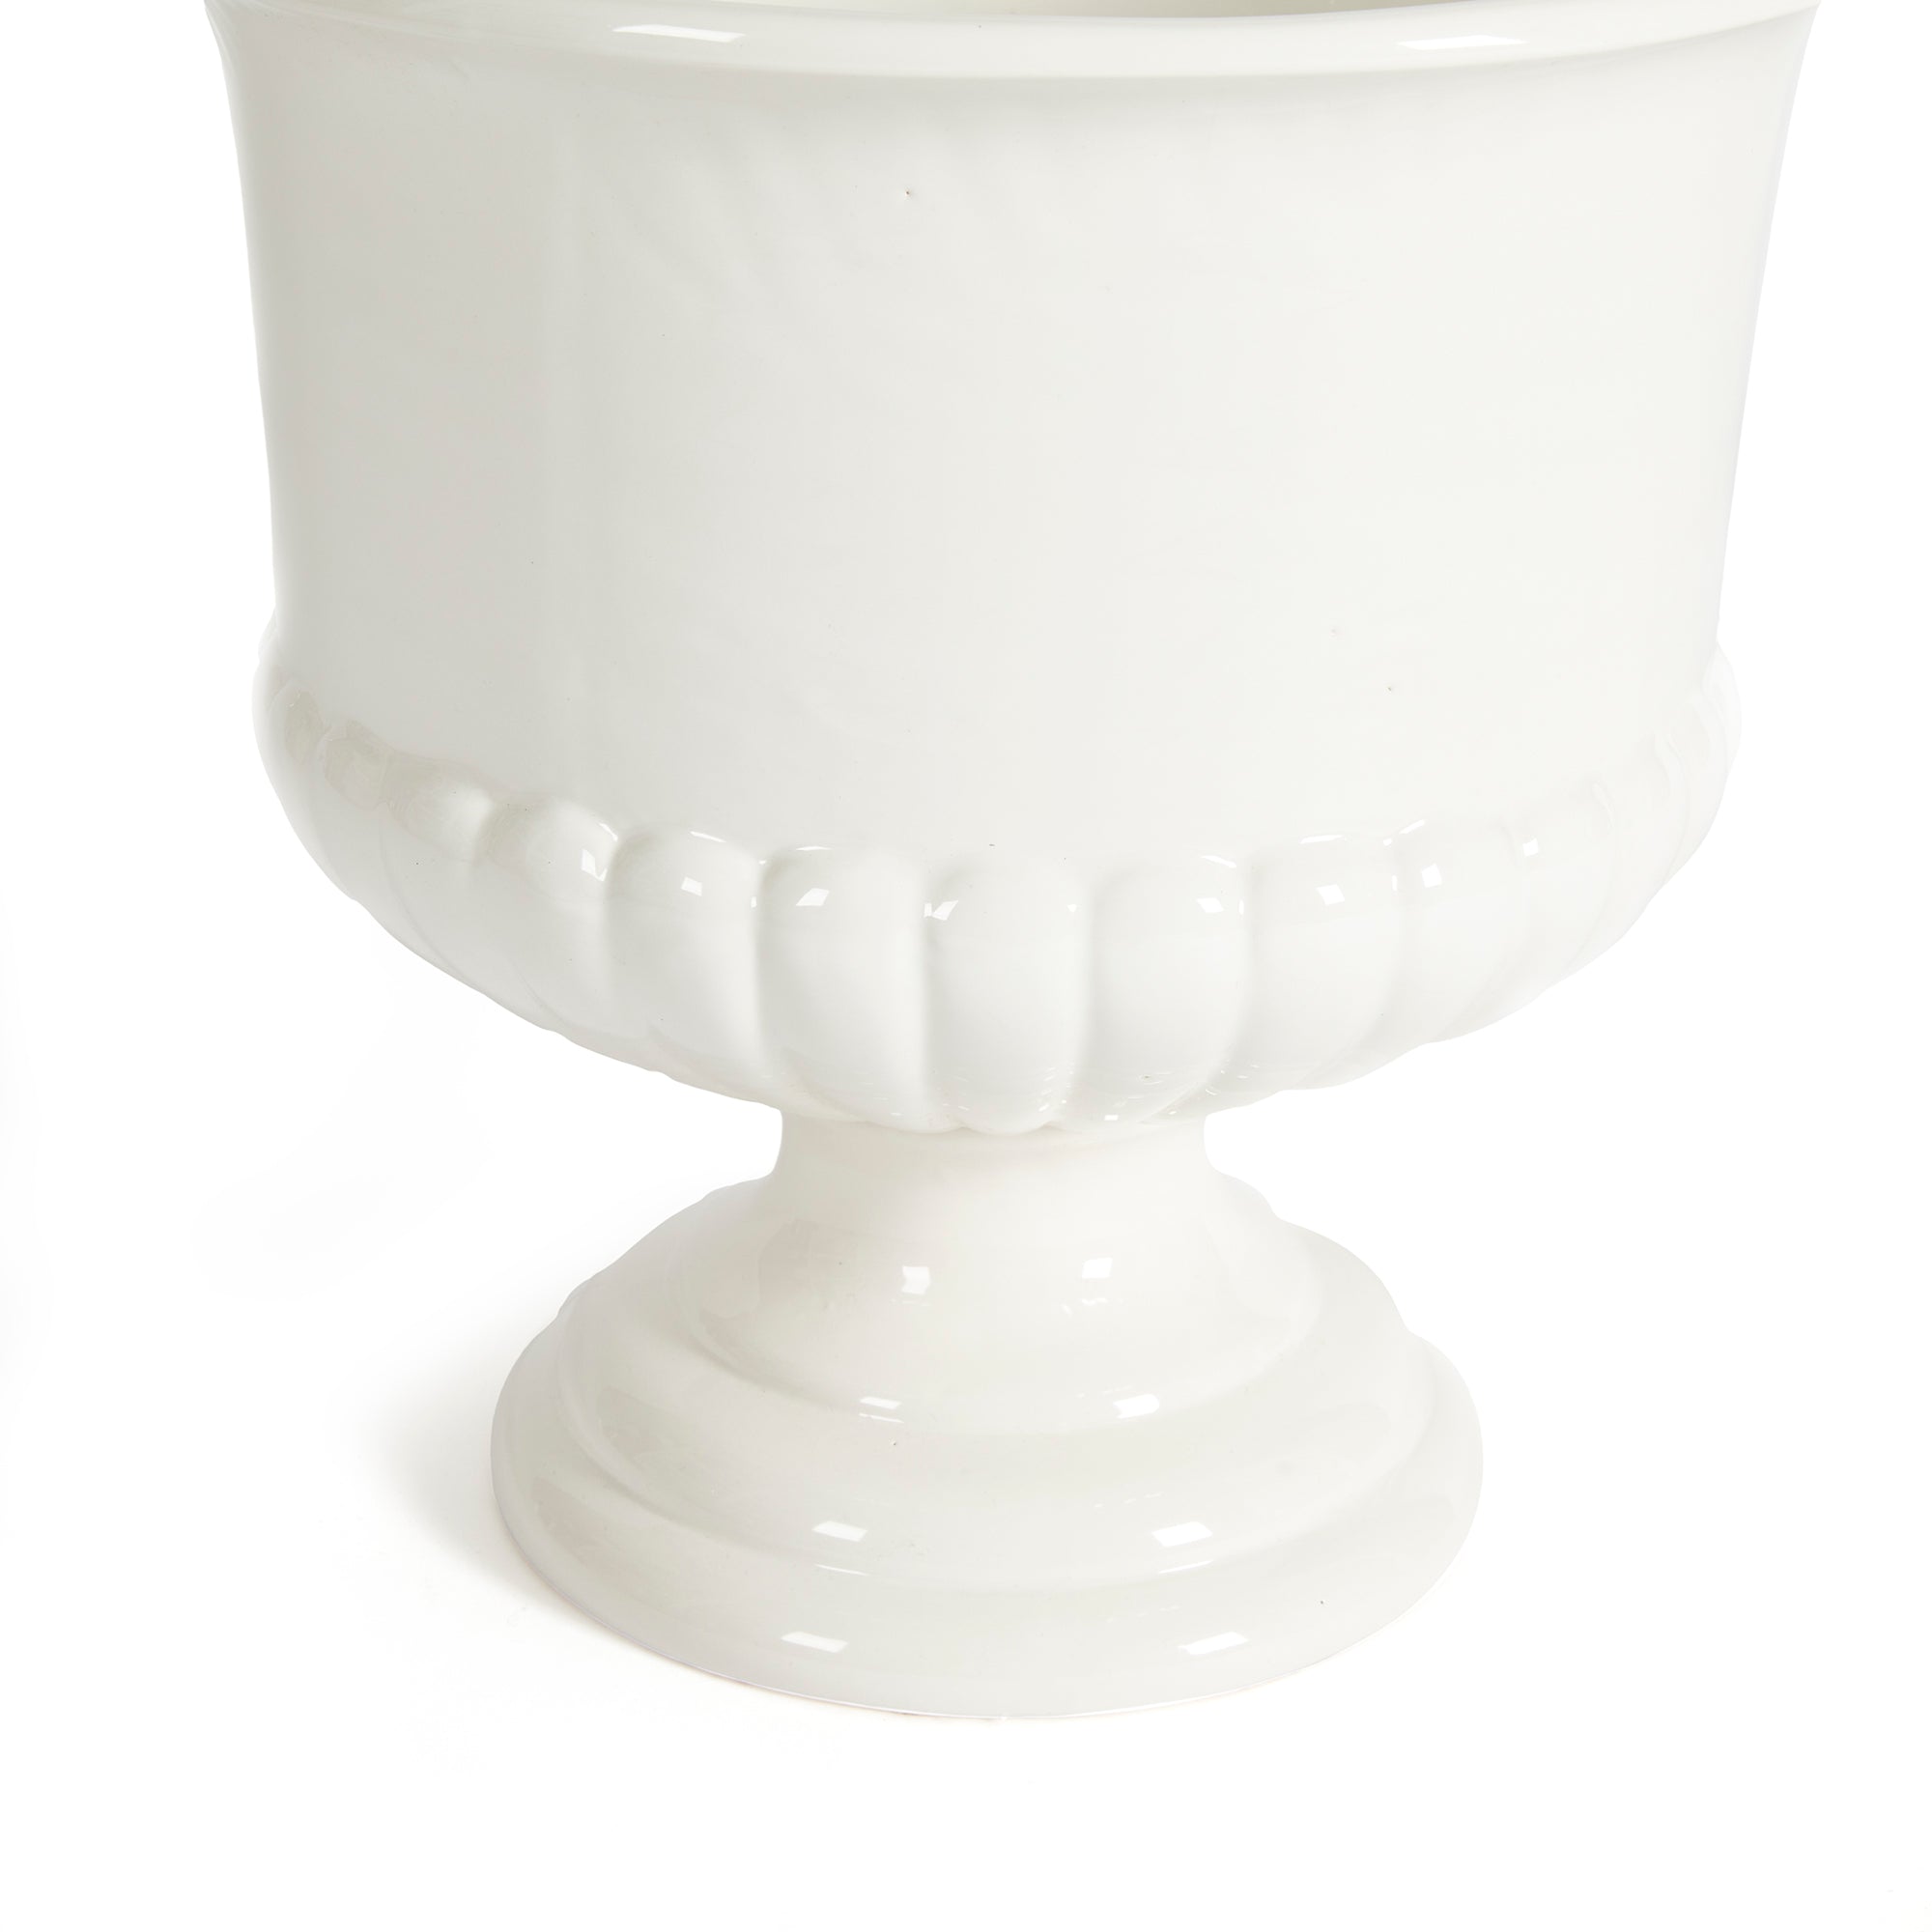 A real statement piece. The Mirabelle Pedestal Bowl is made in classic Italian style. A beautiful addition to any traditional to transitional space. Amethyst Home provides interior design, new construction, custom furniture, and area rugs in the Tampa metro area.